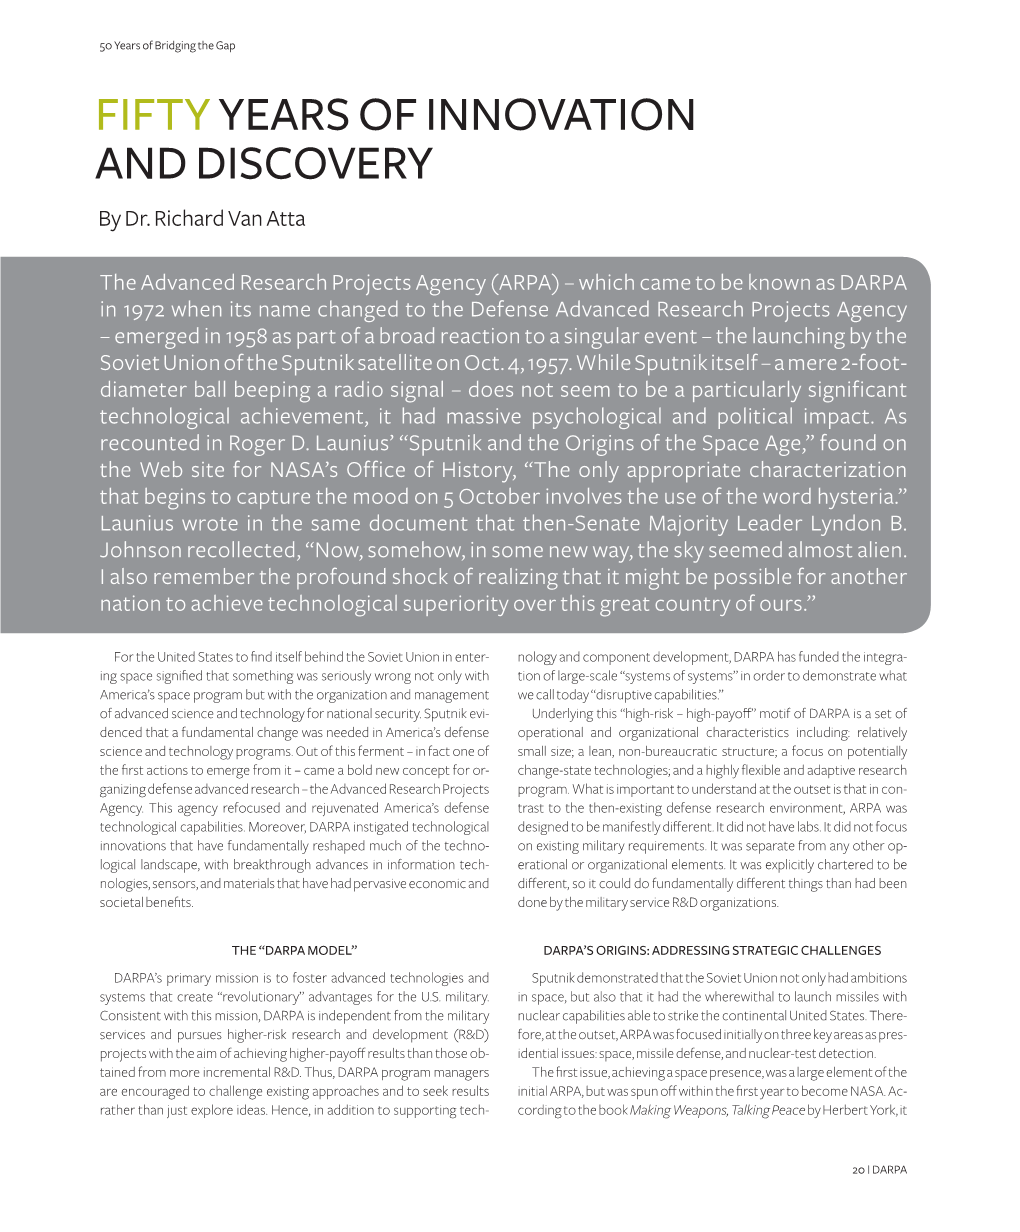 Fiftyyears of Innovation and Discovery